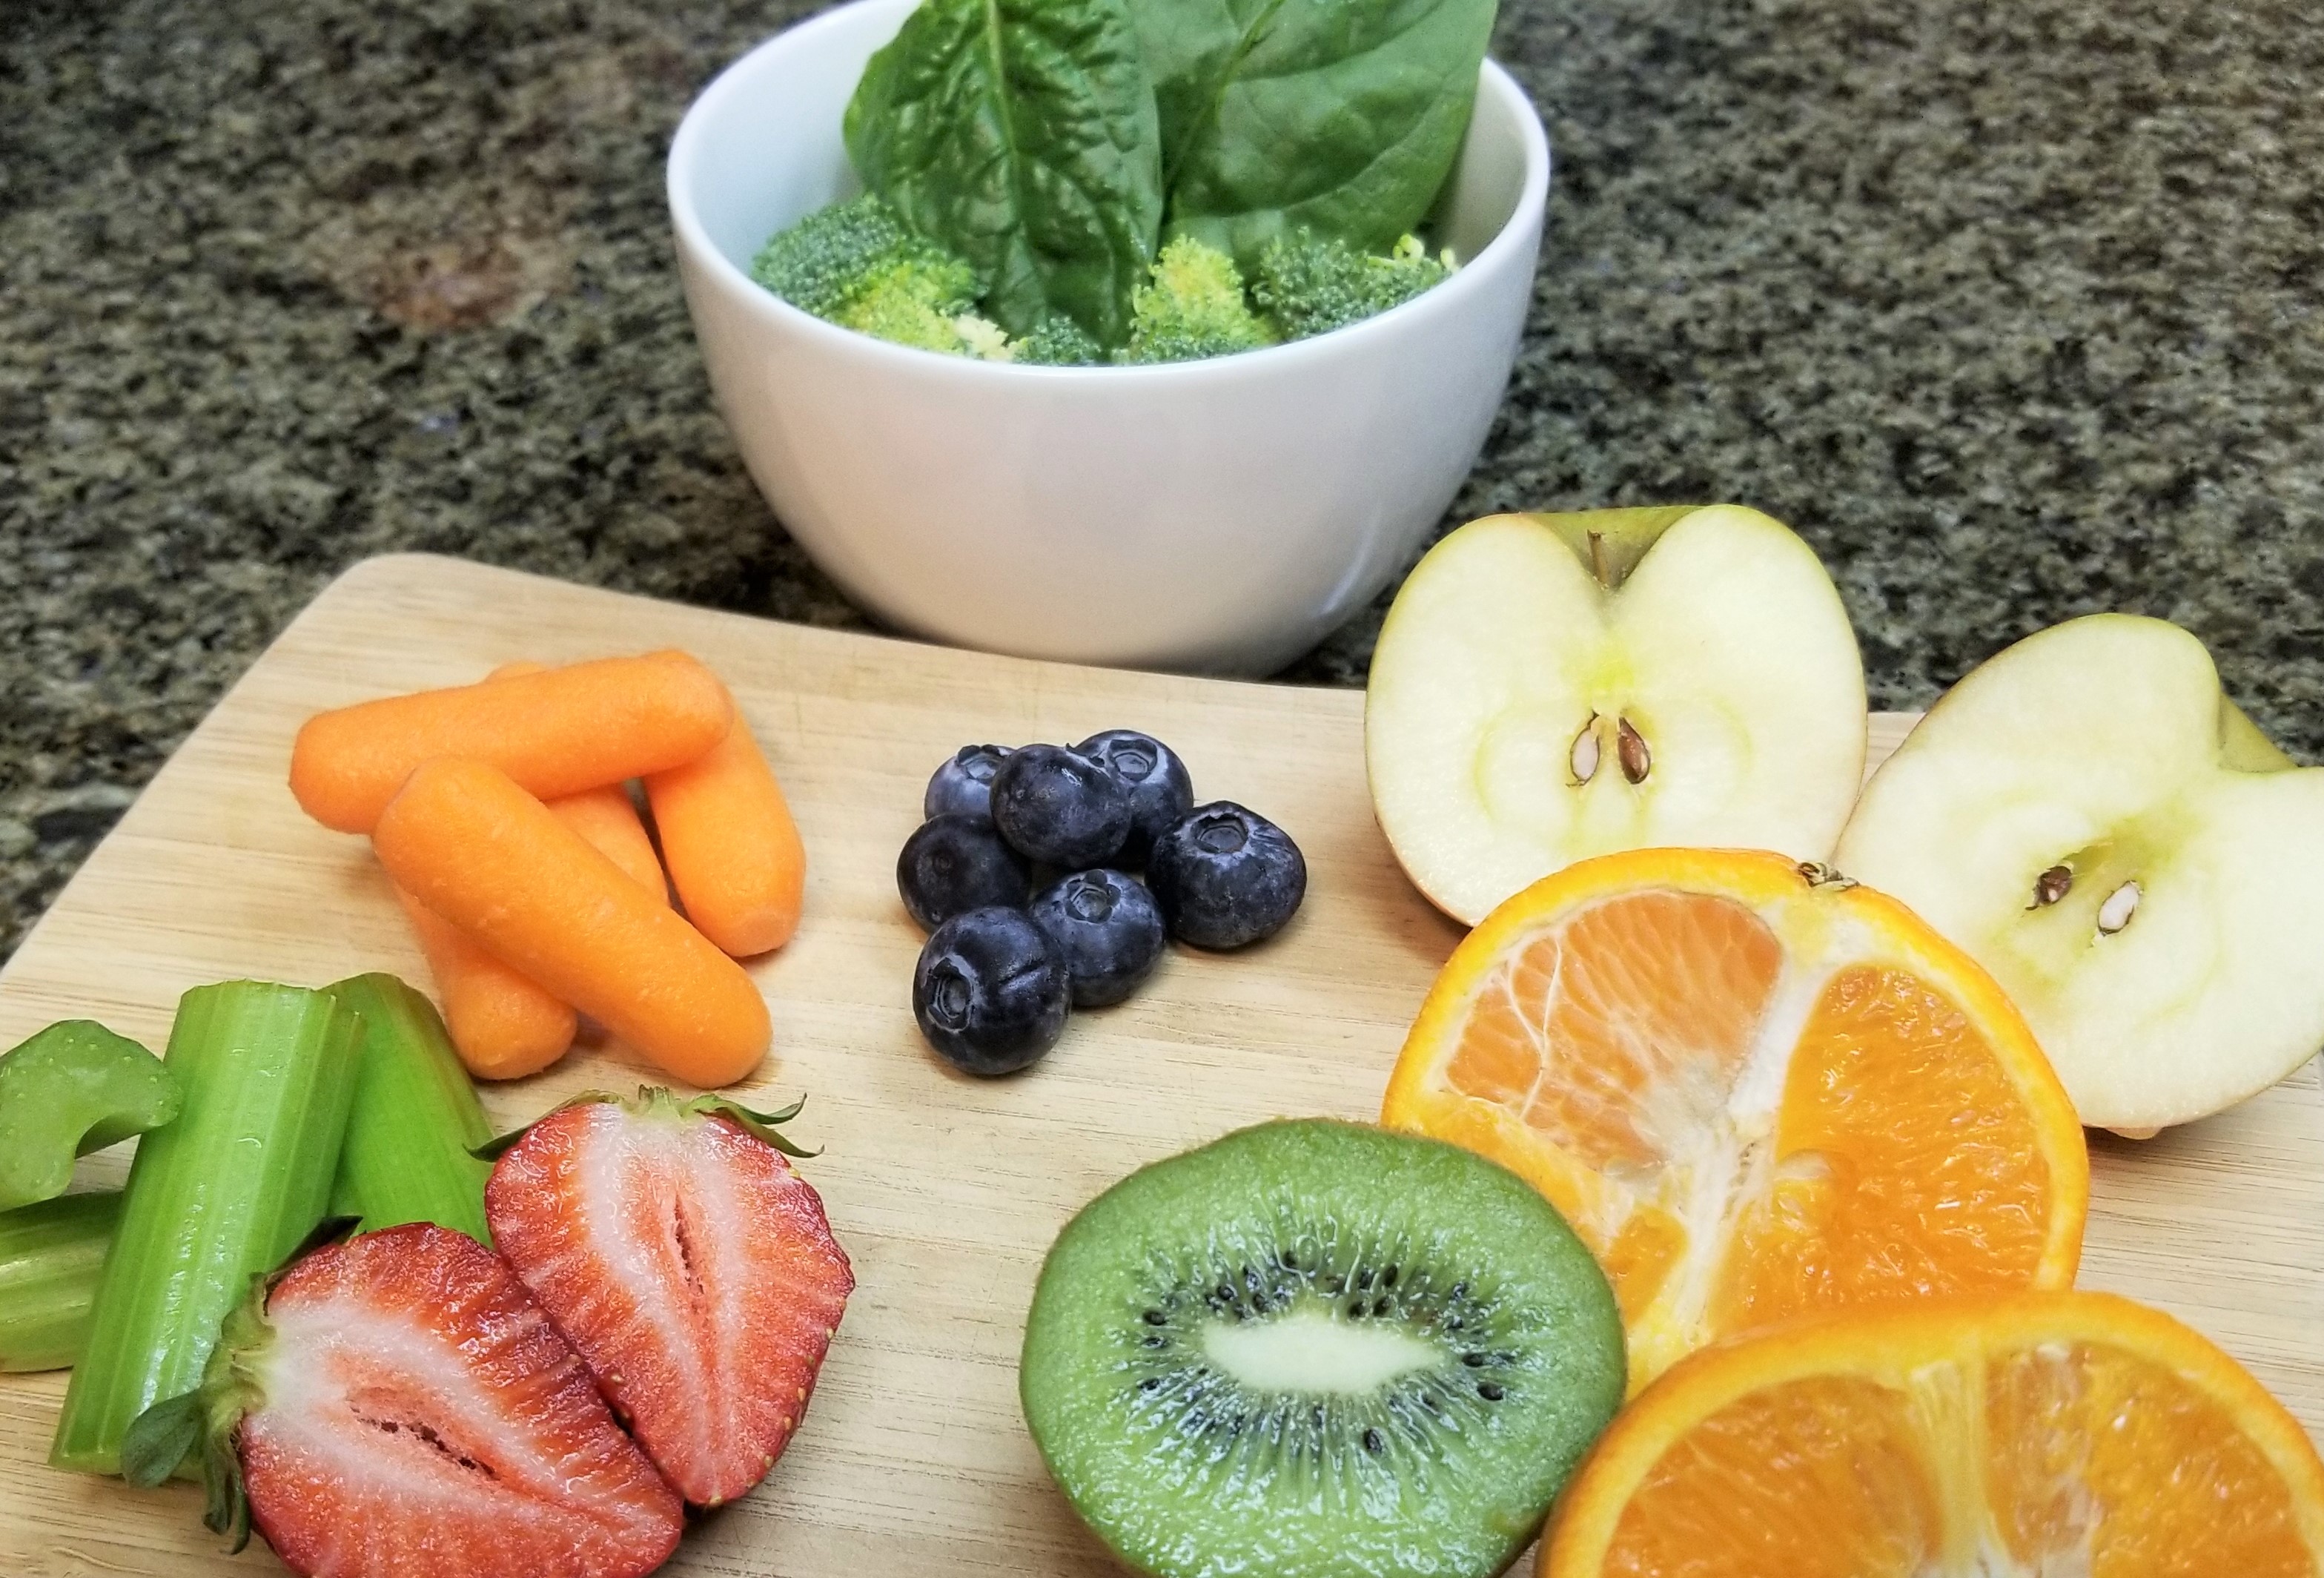 5 Ways To Get Your Kids Hooked On Fruits And Veggies